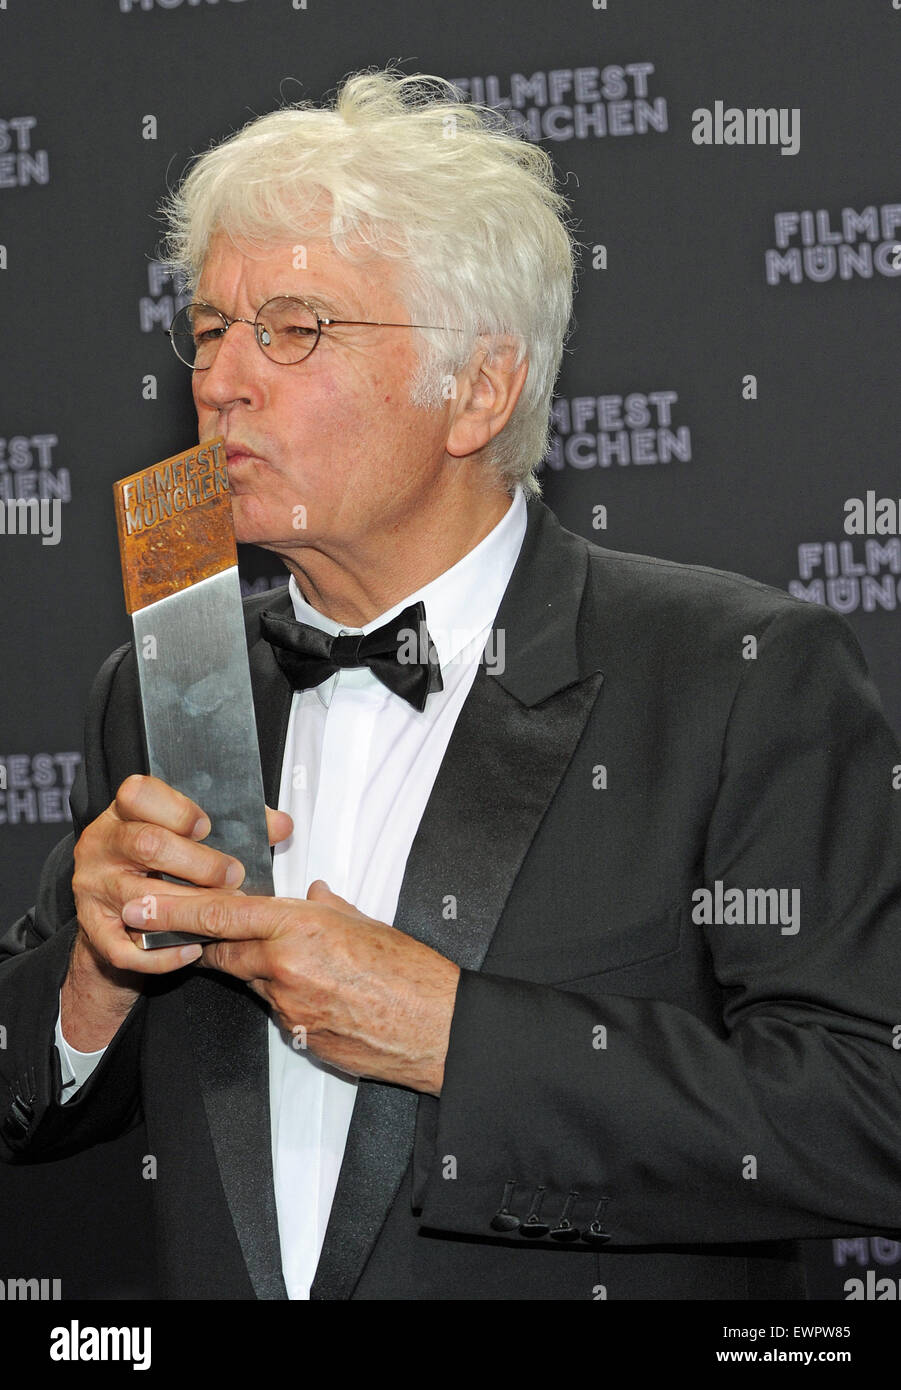 Munich, Germany. 29th June, 2015. French director Jean-Jacques Annaud poses with his CineMerit Award at the film festival in Munich, Germany, 29 June 2015. The Munich International Film Festival has been honouring outstanding figures in the international film industry with the award since 1997. Photo: Ursula Dueren/dpa/Alamy Live News Stock Photo